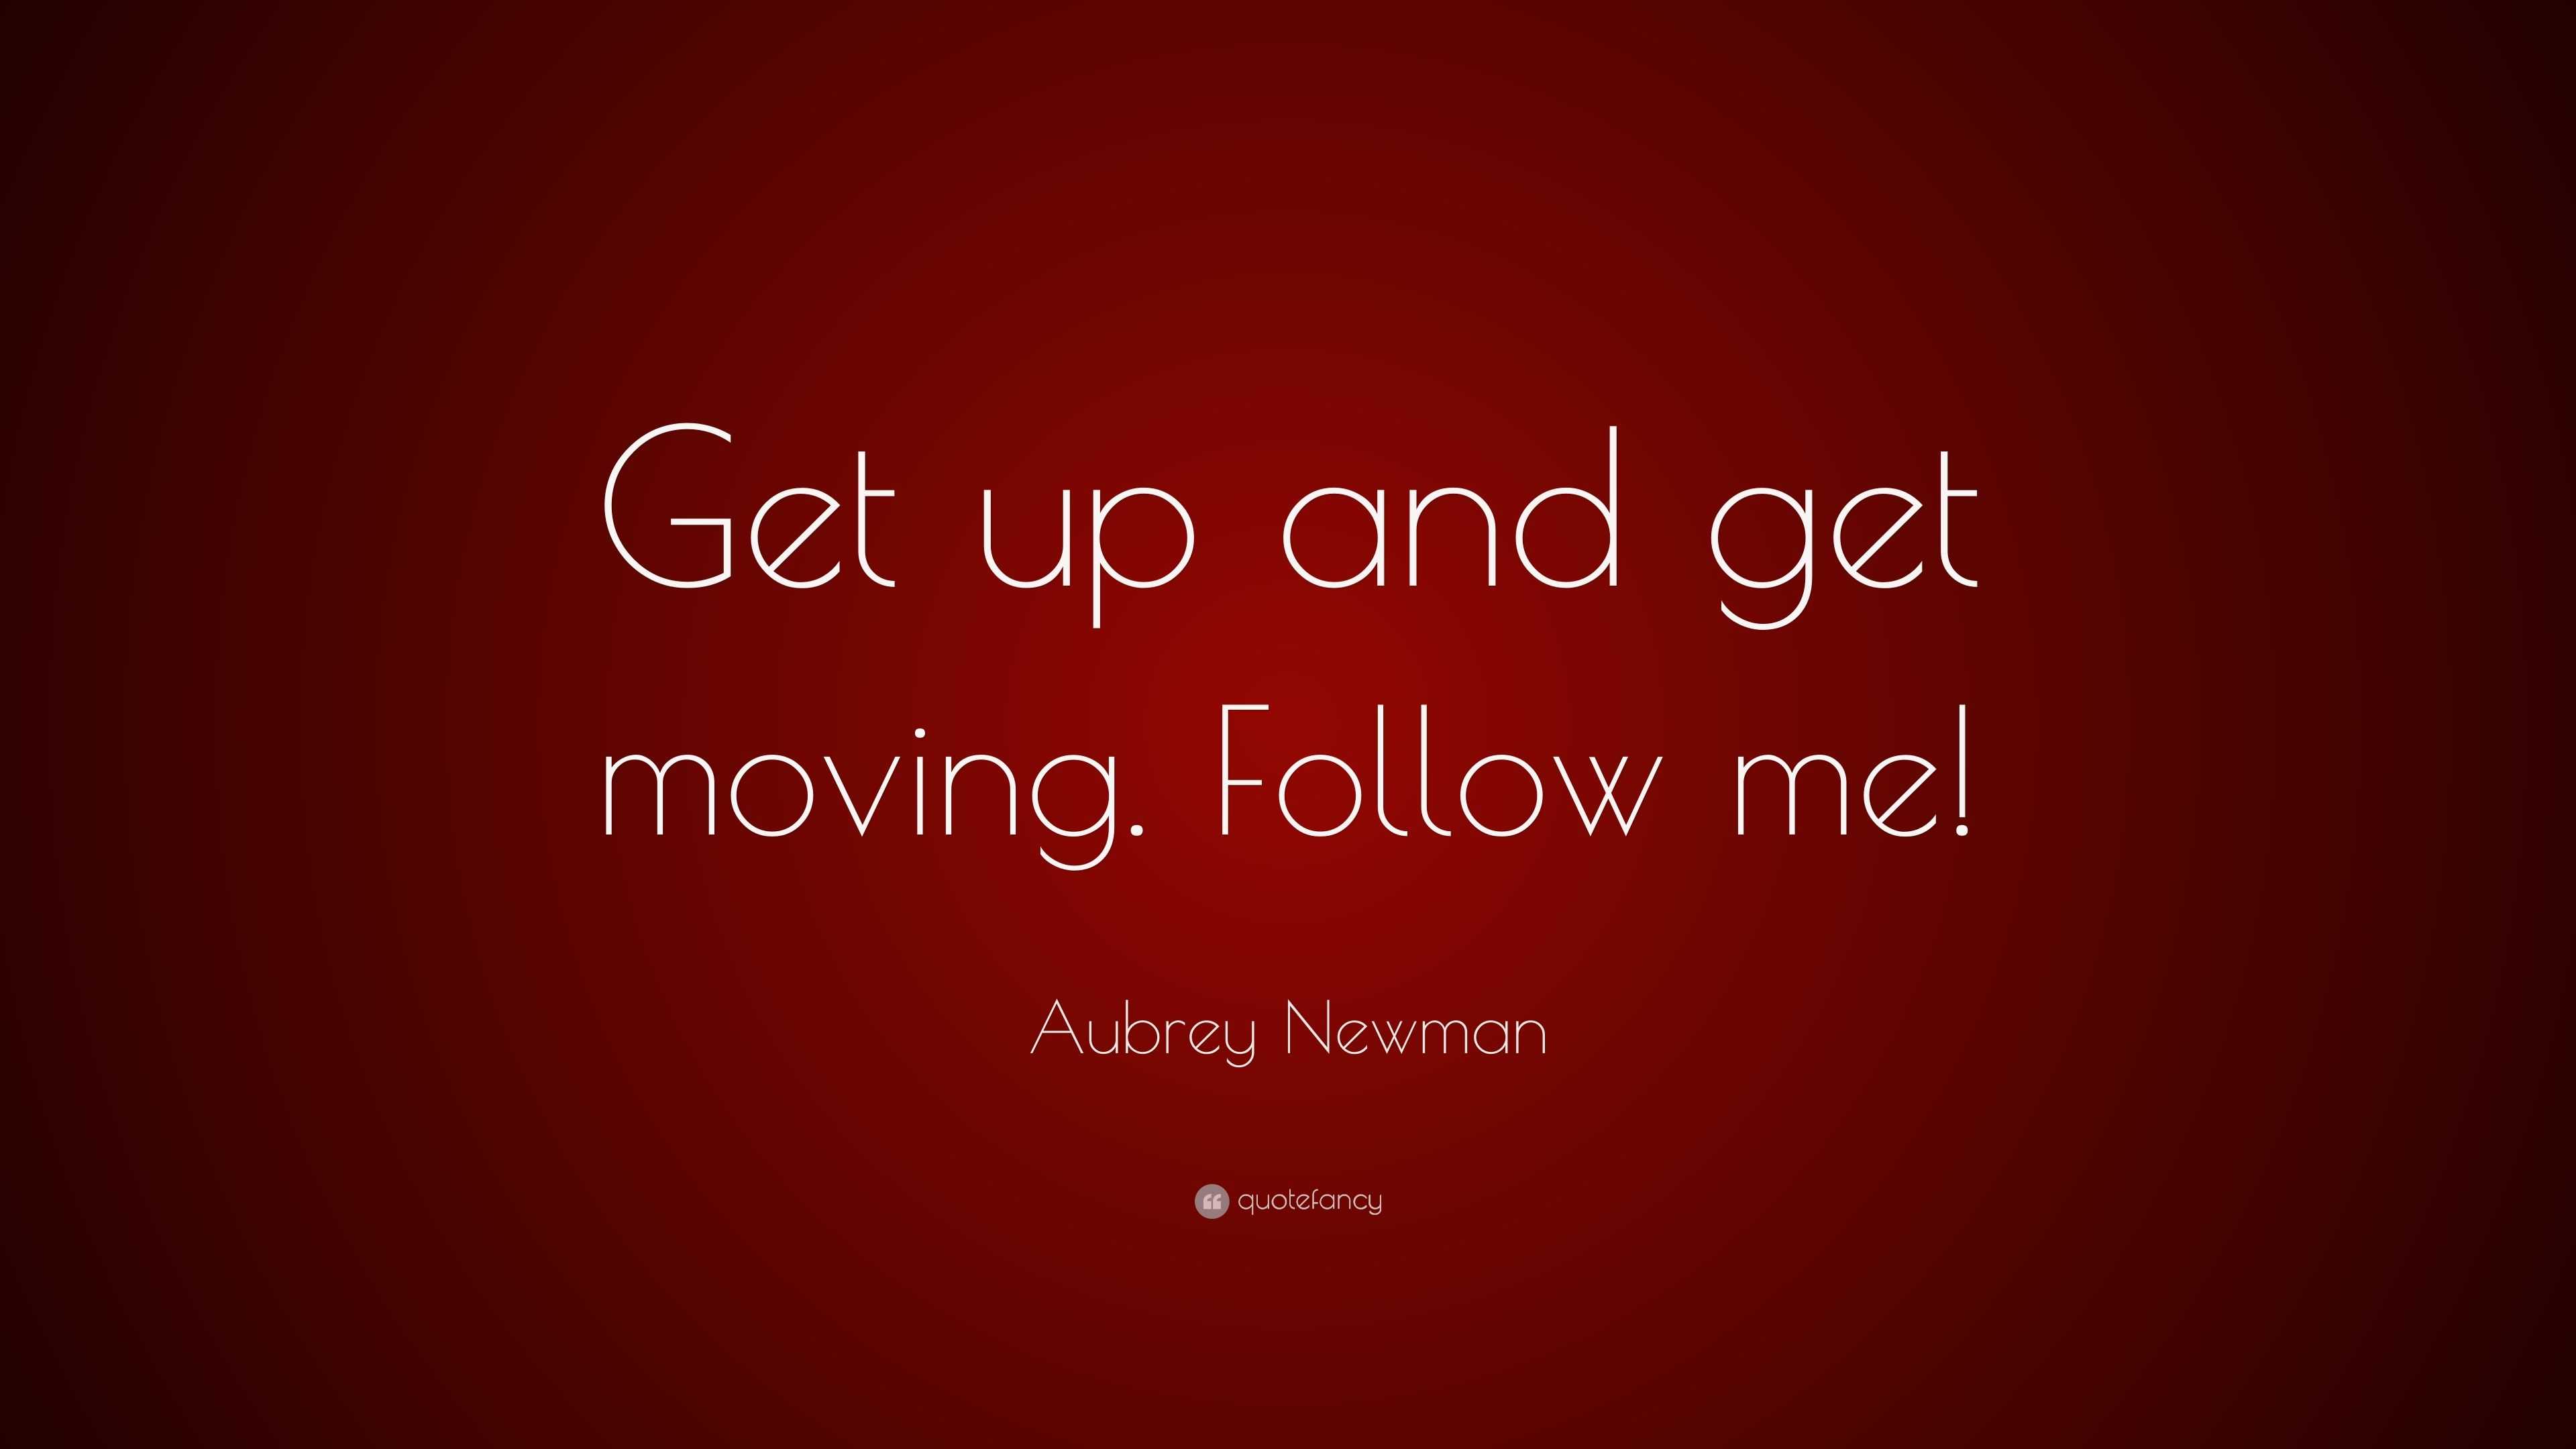 Aubrey Newman Quote: “Get up and get moving. Follow me!”